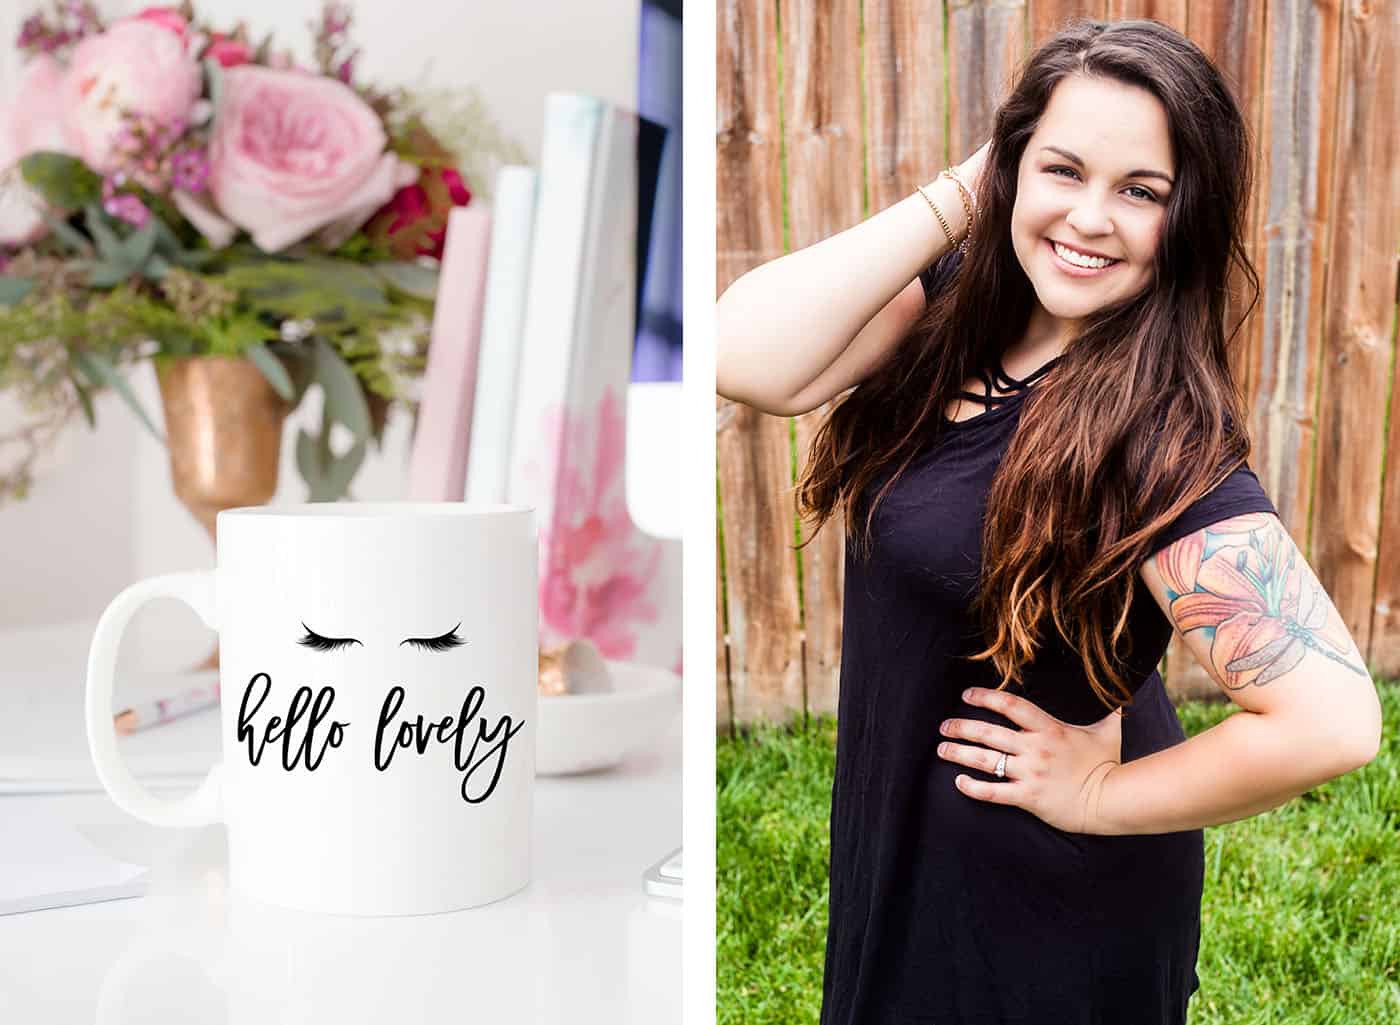 "Hello lovely" mug and word-of-mouth marketing genius Heather Yeager